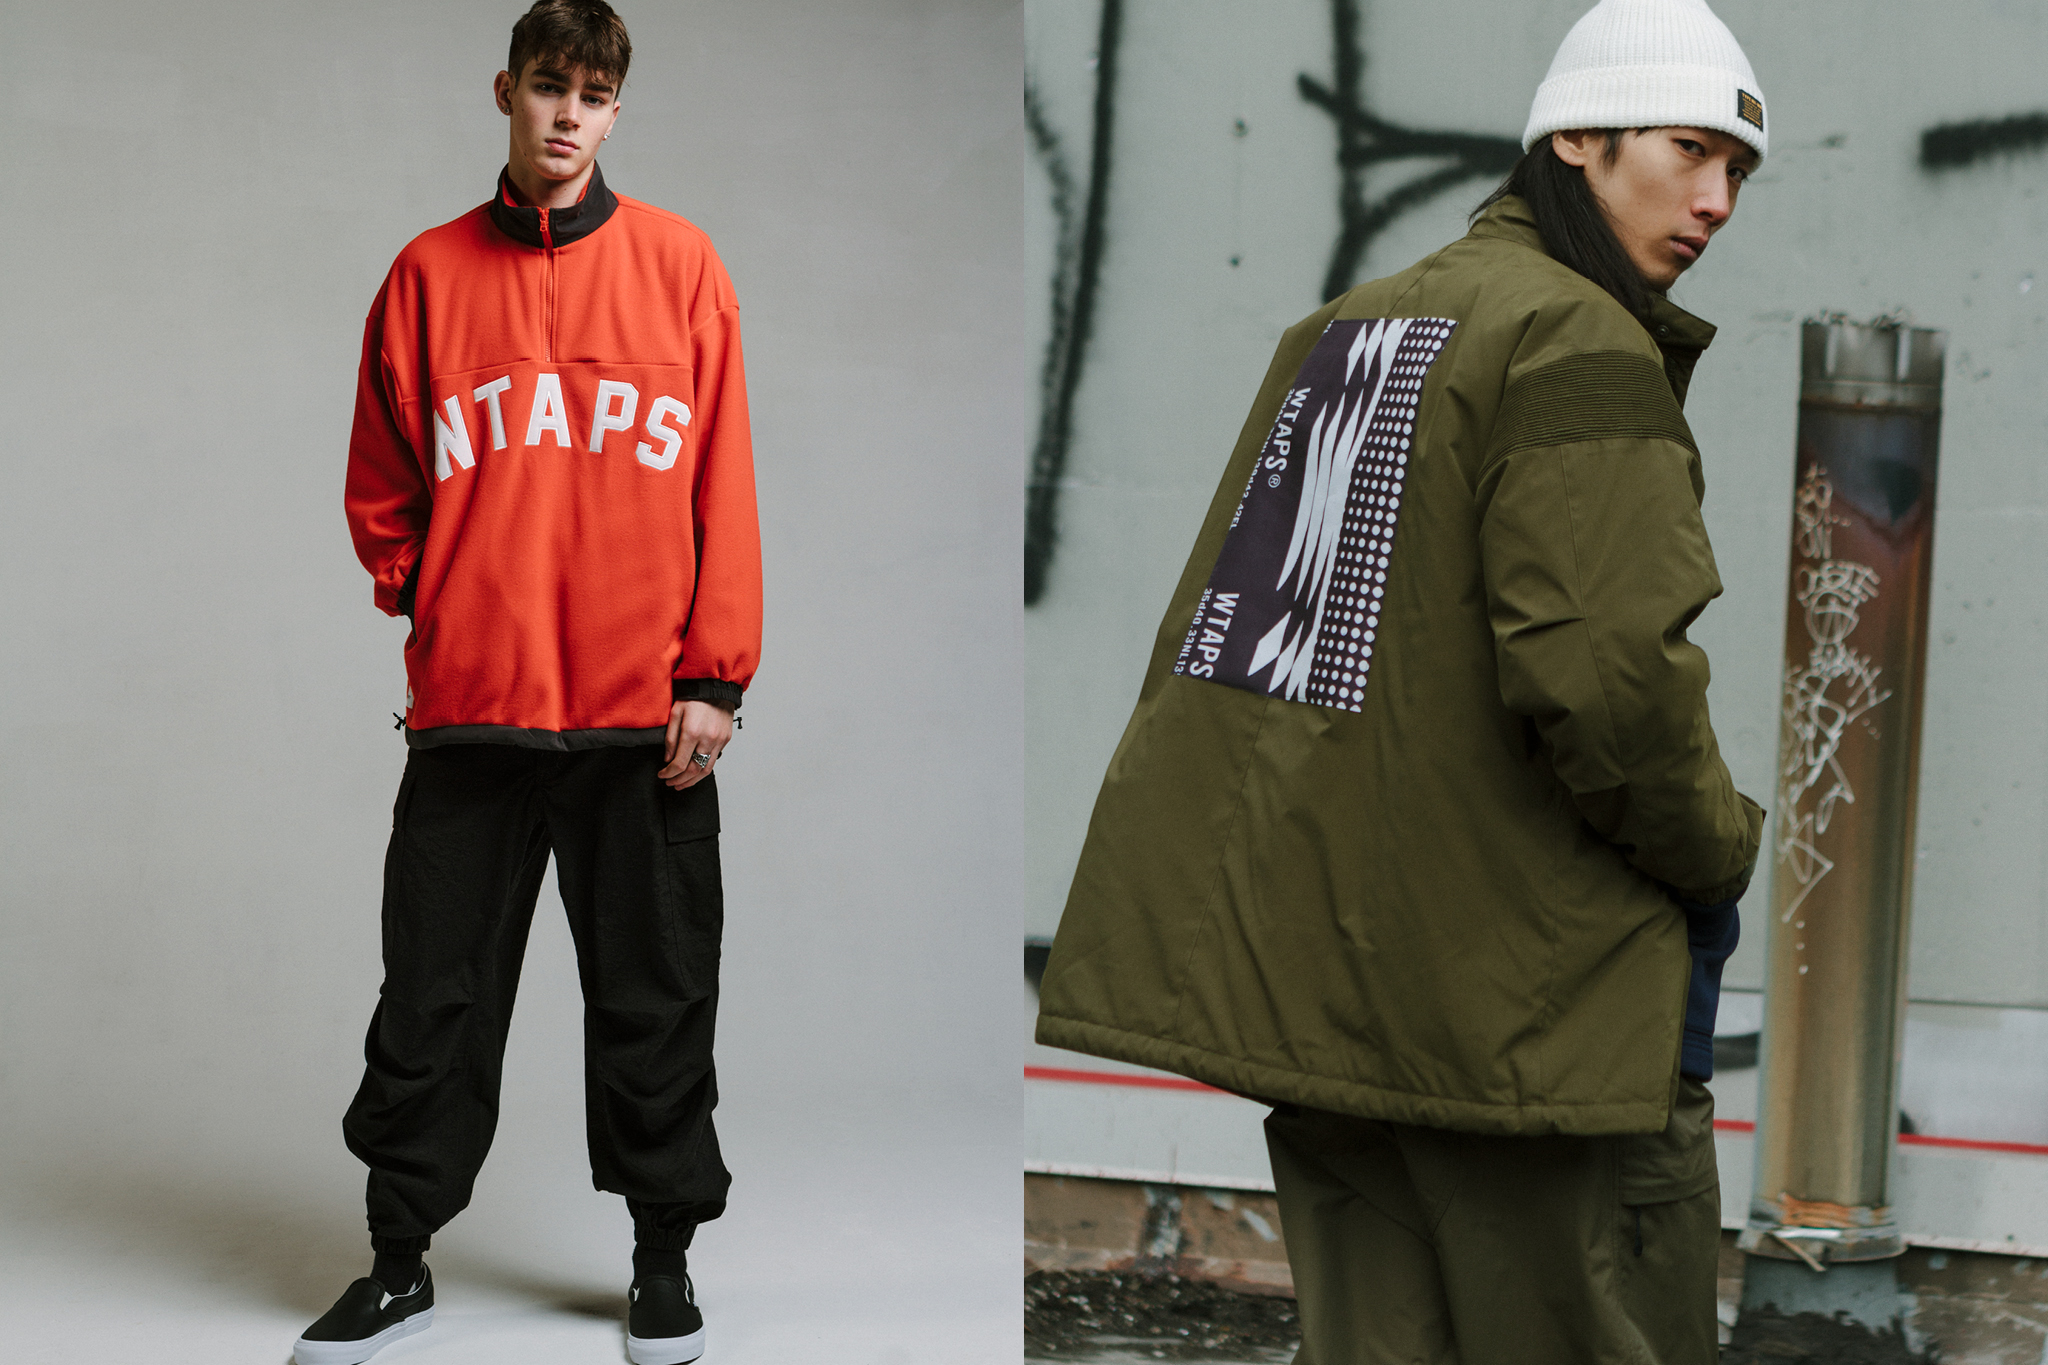 WTAPS and NEIGHBORHOOD is on display in HAVEN's latest FW '18 